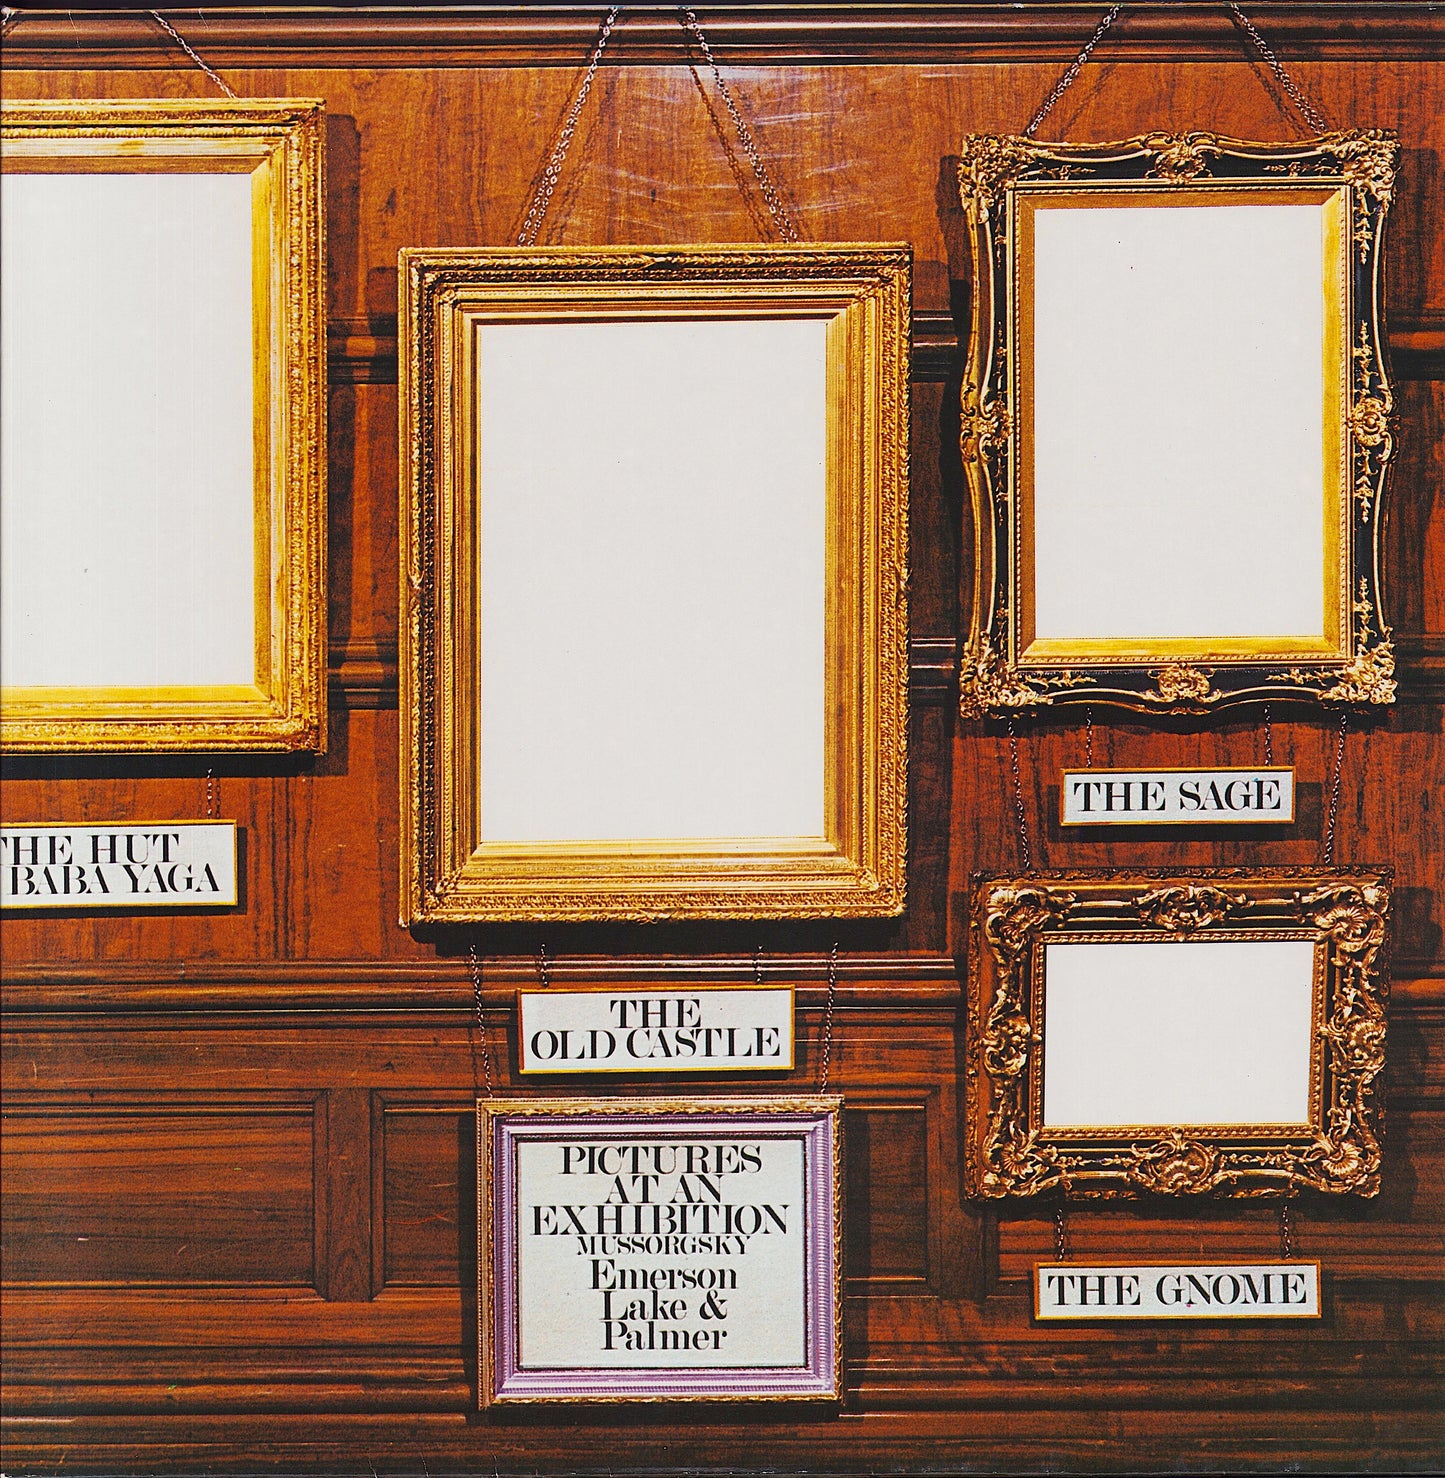 Emerson, Lake & Palmer - Pictures At An Exhibition (Vinyl LP)